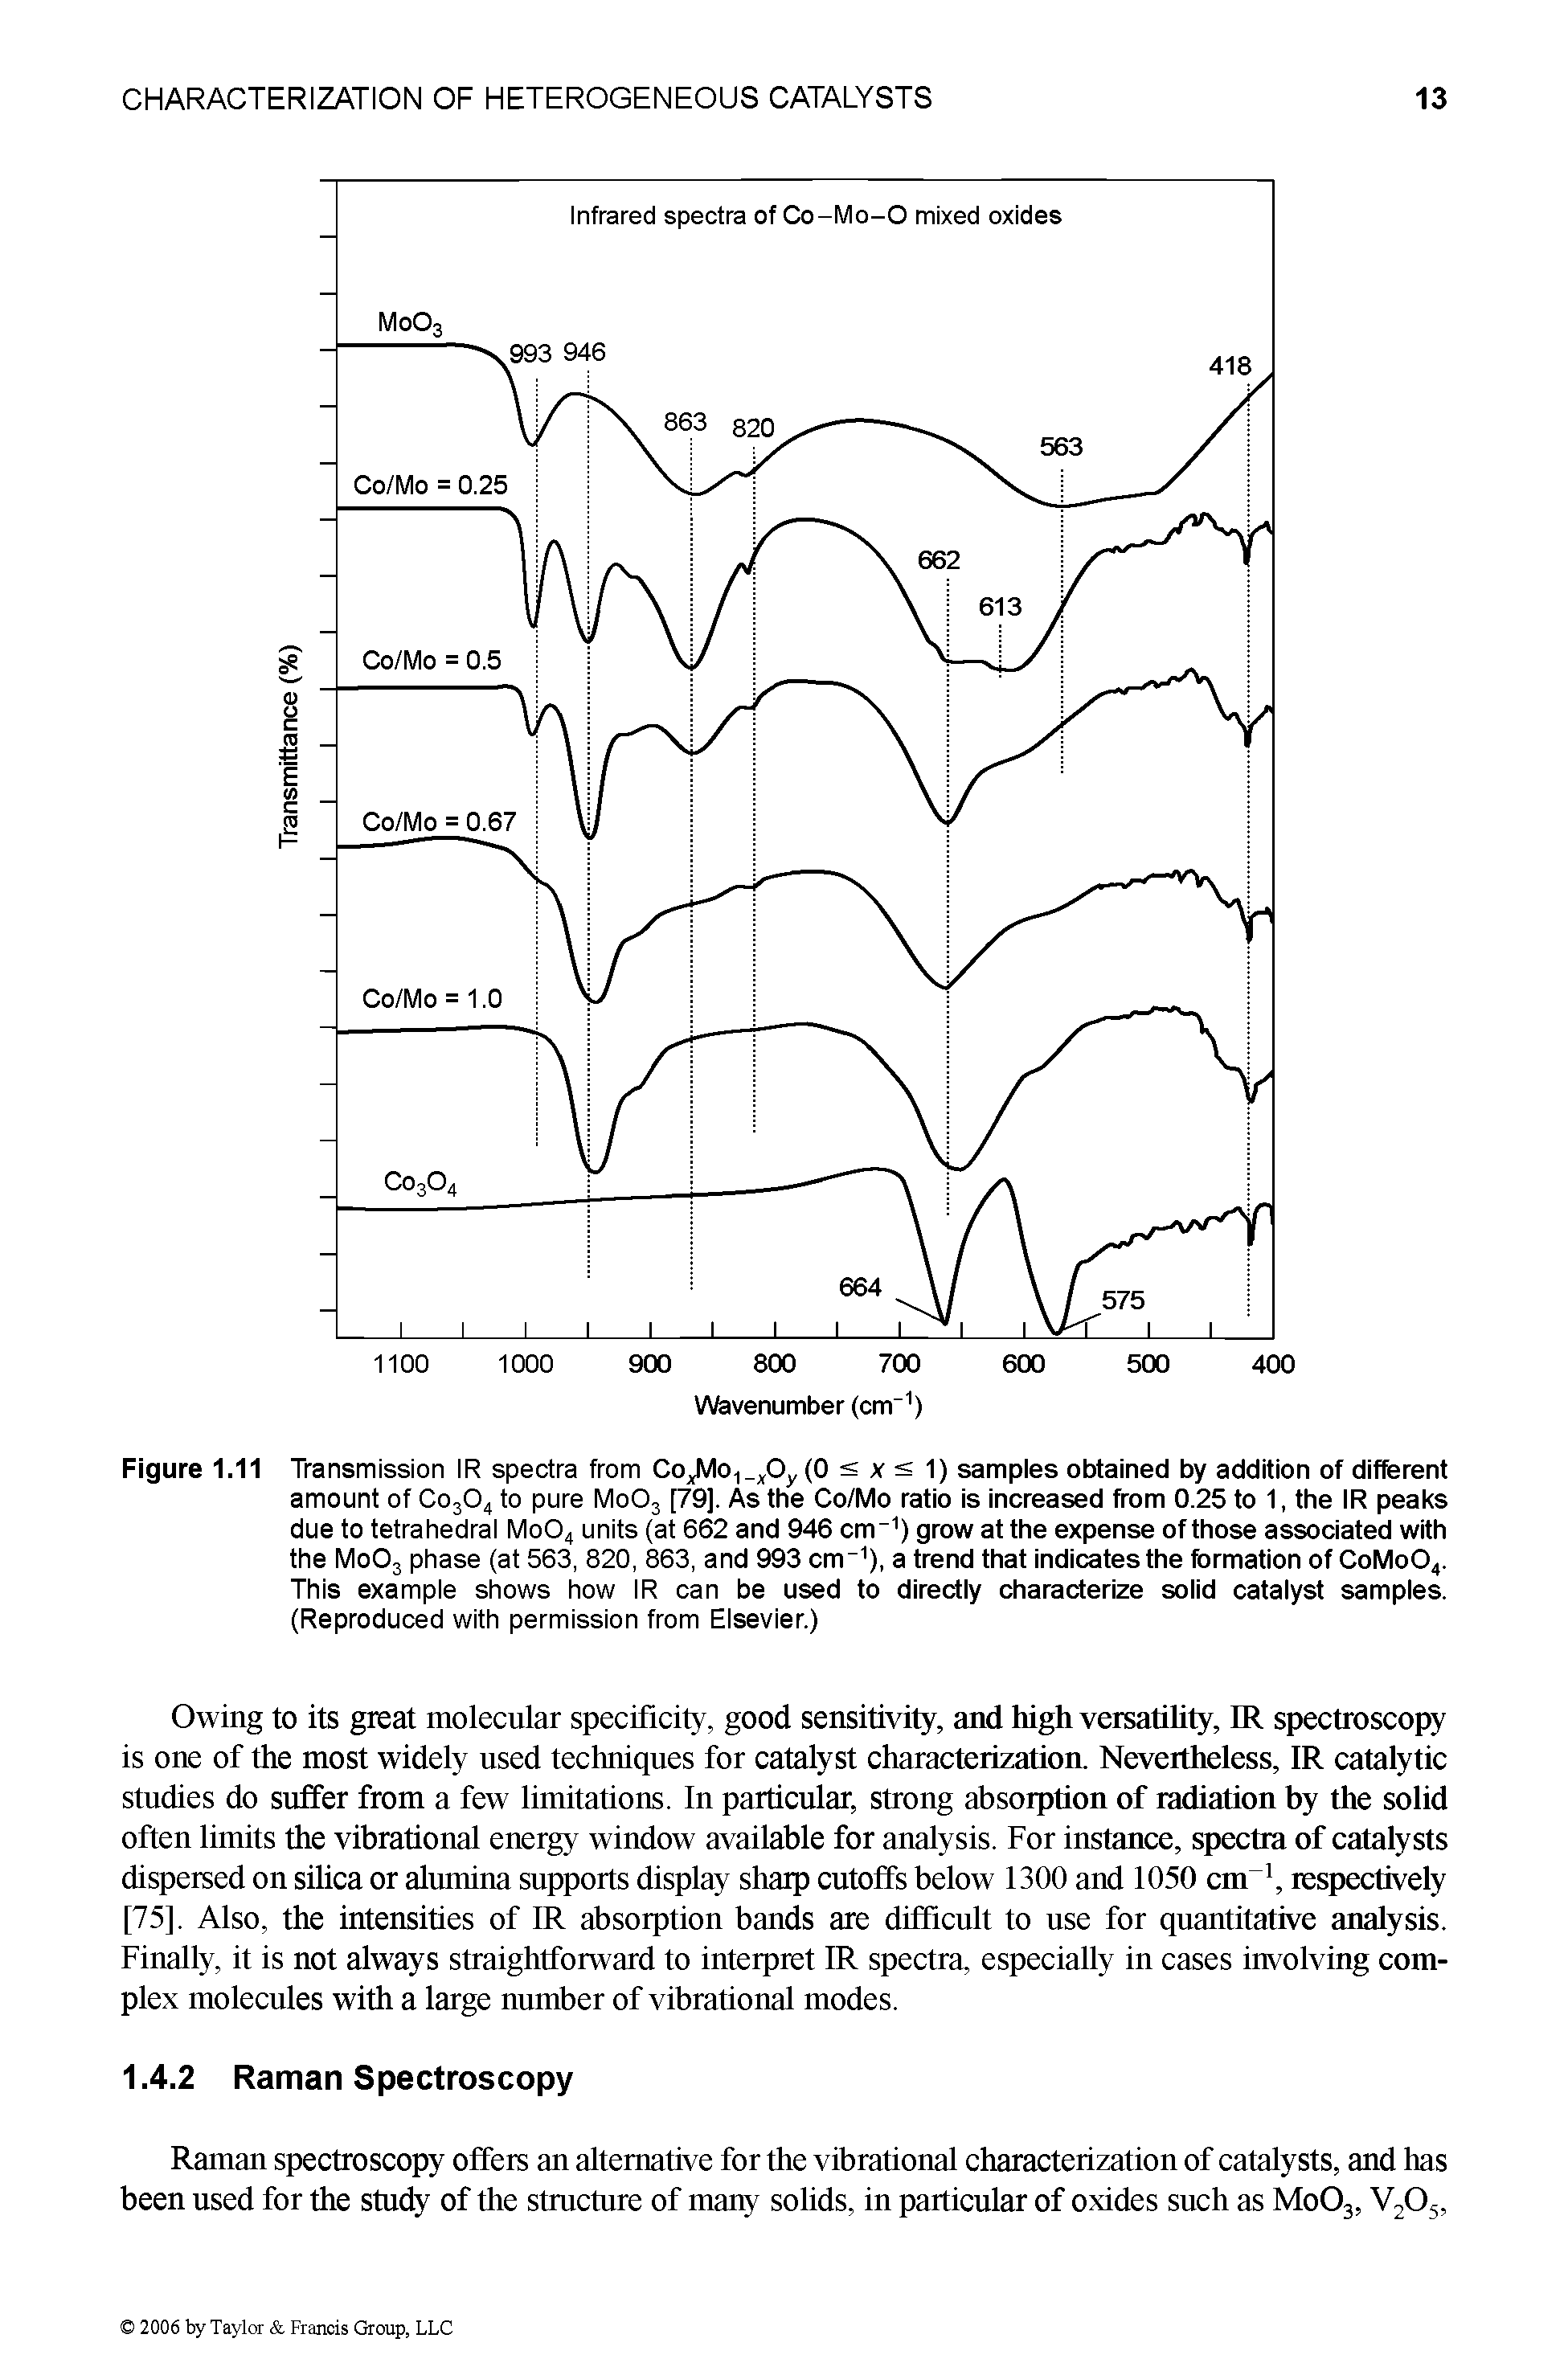 Figure 1.11 Transmission IR spectra from Co Mo Oy (0 < x < 1) samples obtained by addition of different amount of Co304 to pure Mo03 [79]. As the Co/Mo ratio is increased from 0.25 to 1, the IR peaks due to tetrahedral Mo04 units (at 662 and 946 cm-1) grow at the expense of those associated with the Mo03 phase (at 563, 820, 863, and 993 cm-1), a trend that indicates the formation of CoMo04. This example shows how IR can be used to directly characterize solid catalyst samples. (Reproduced with permission from Elsevier.)...